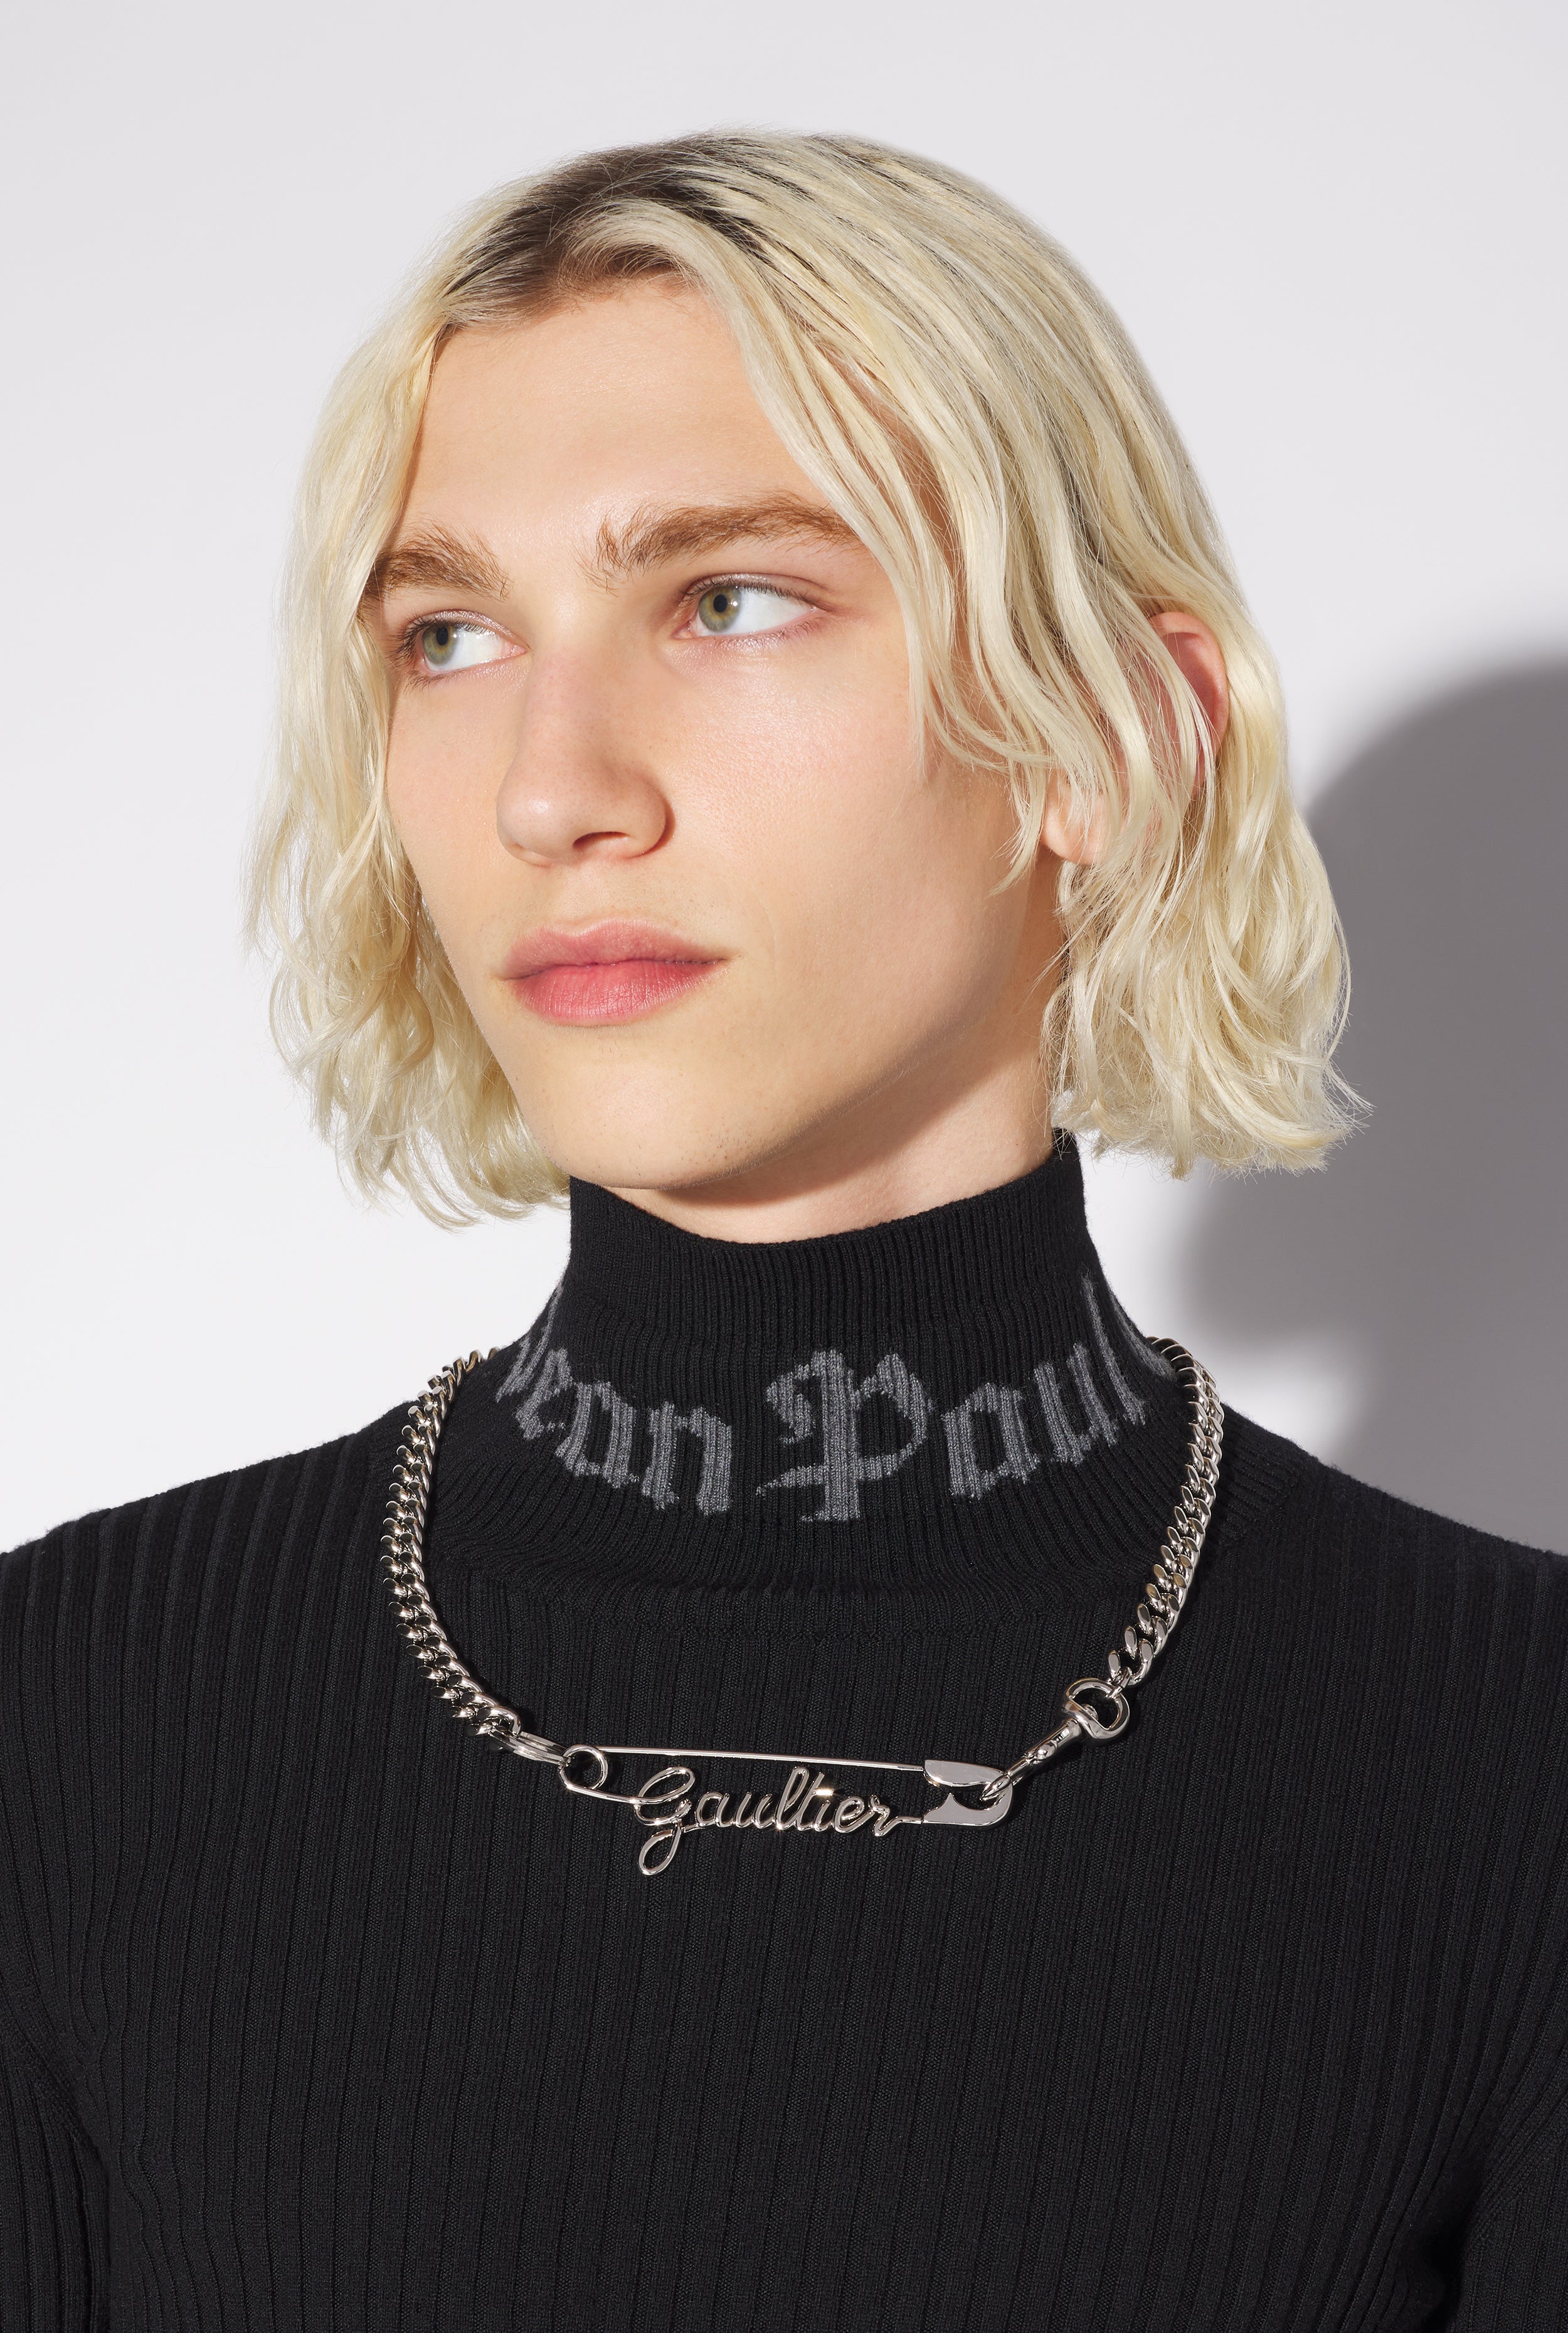 The Silver-Tone Gaultier Safety Pin Necklace